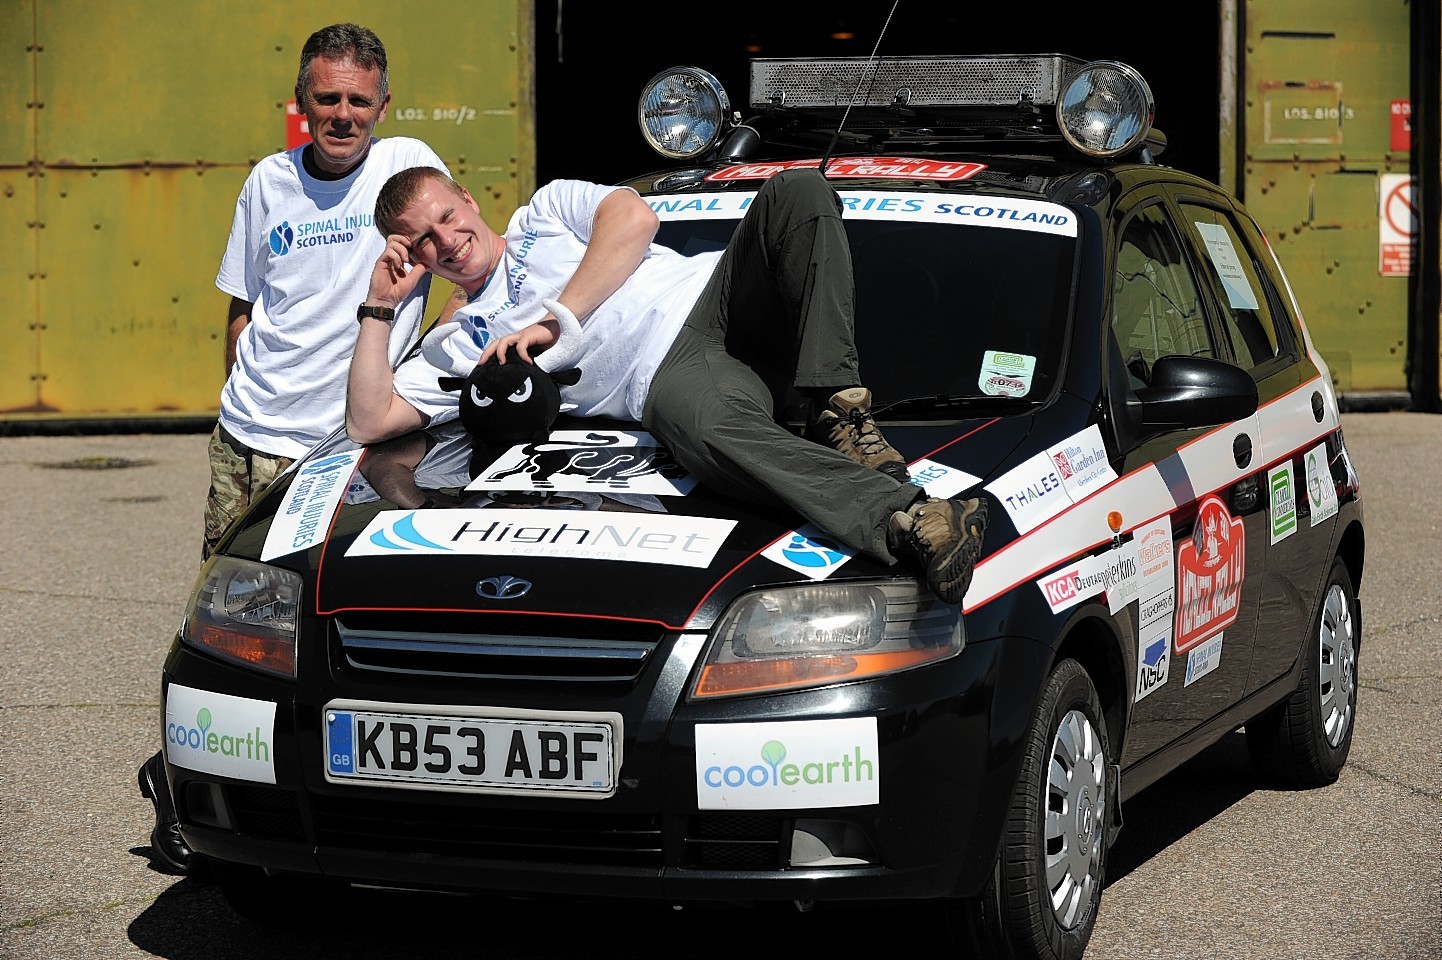 Squaddies set off on the Mongol Rally